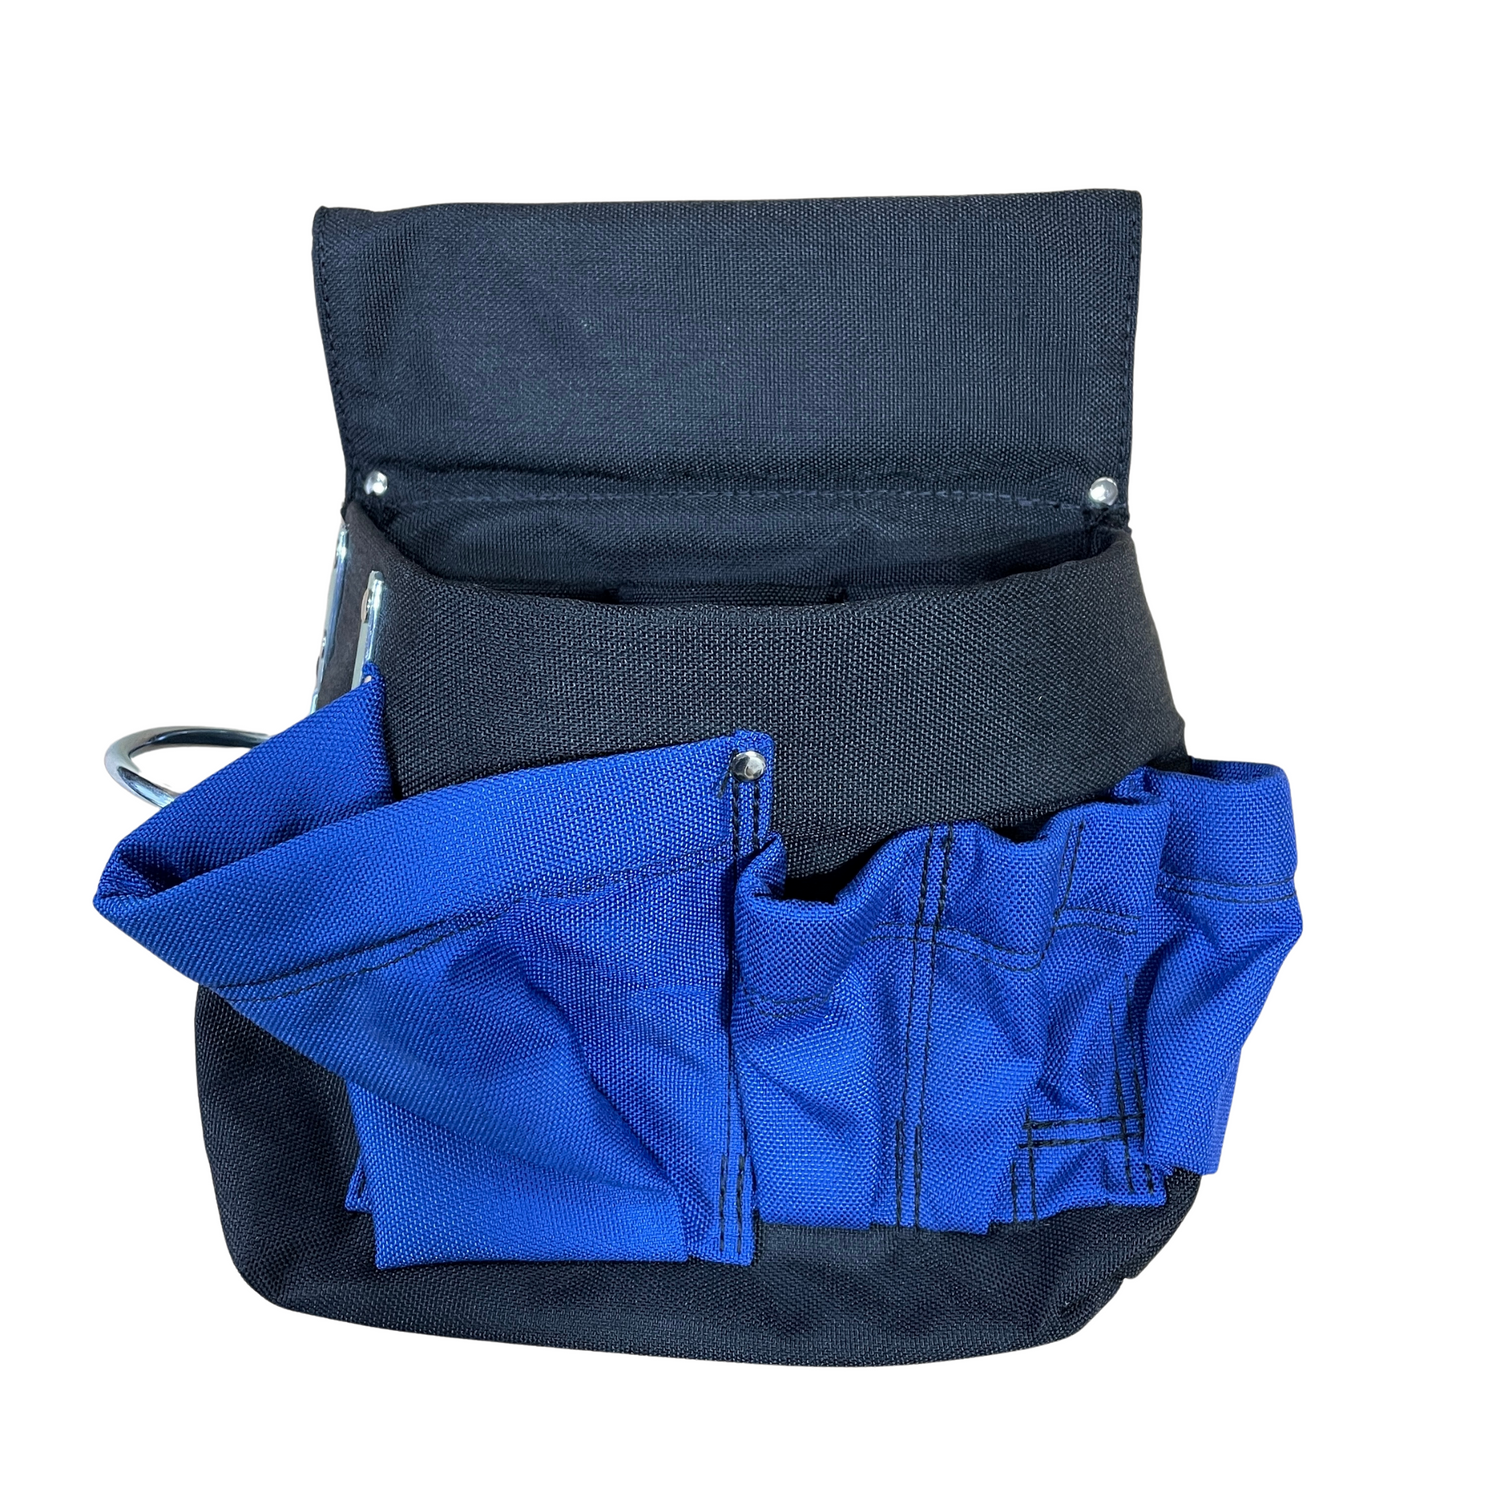 Over 50% off Clearance, Contractor Tool Pouch - 820